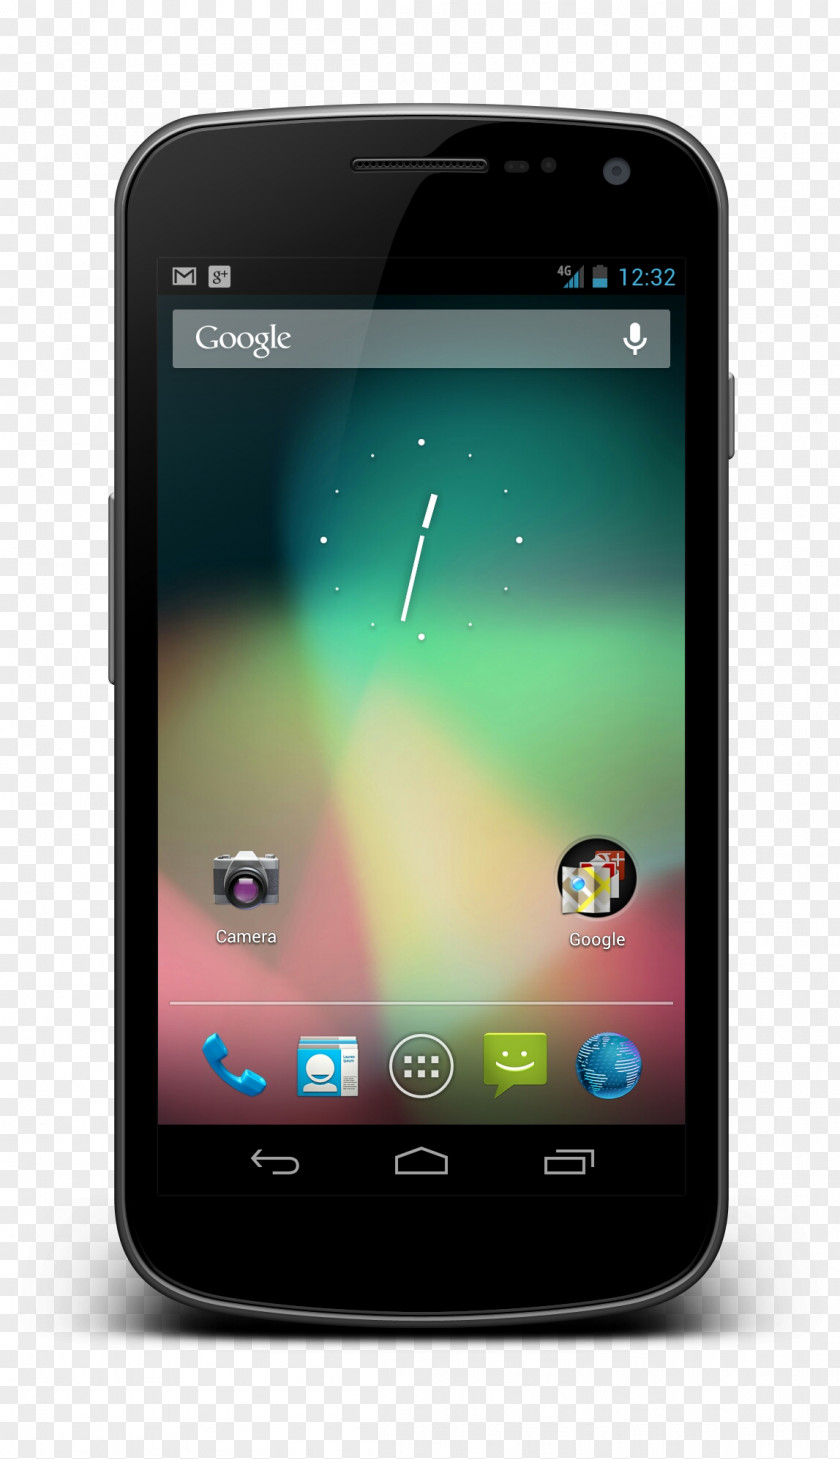 Smartphone Galaxy Nexus S 4 Android PNG